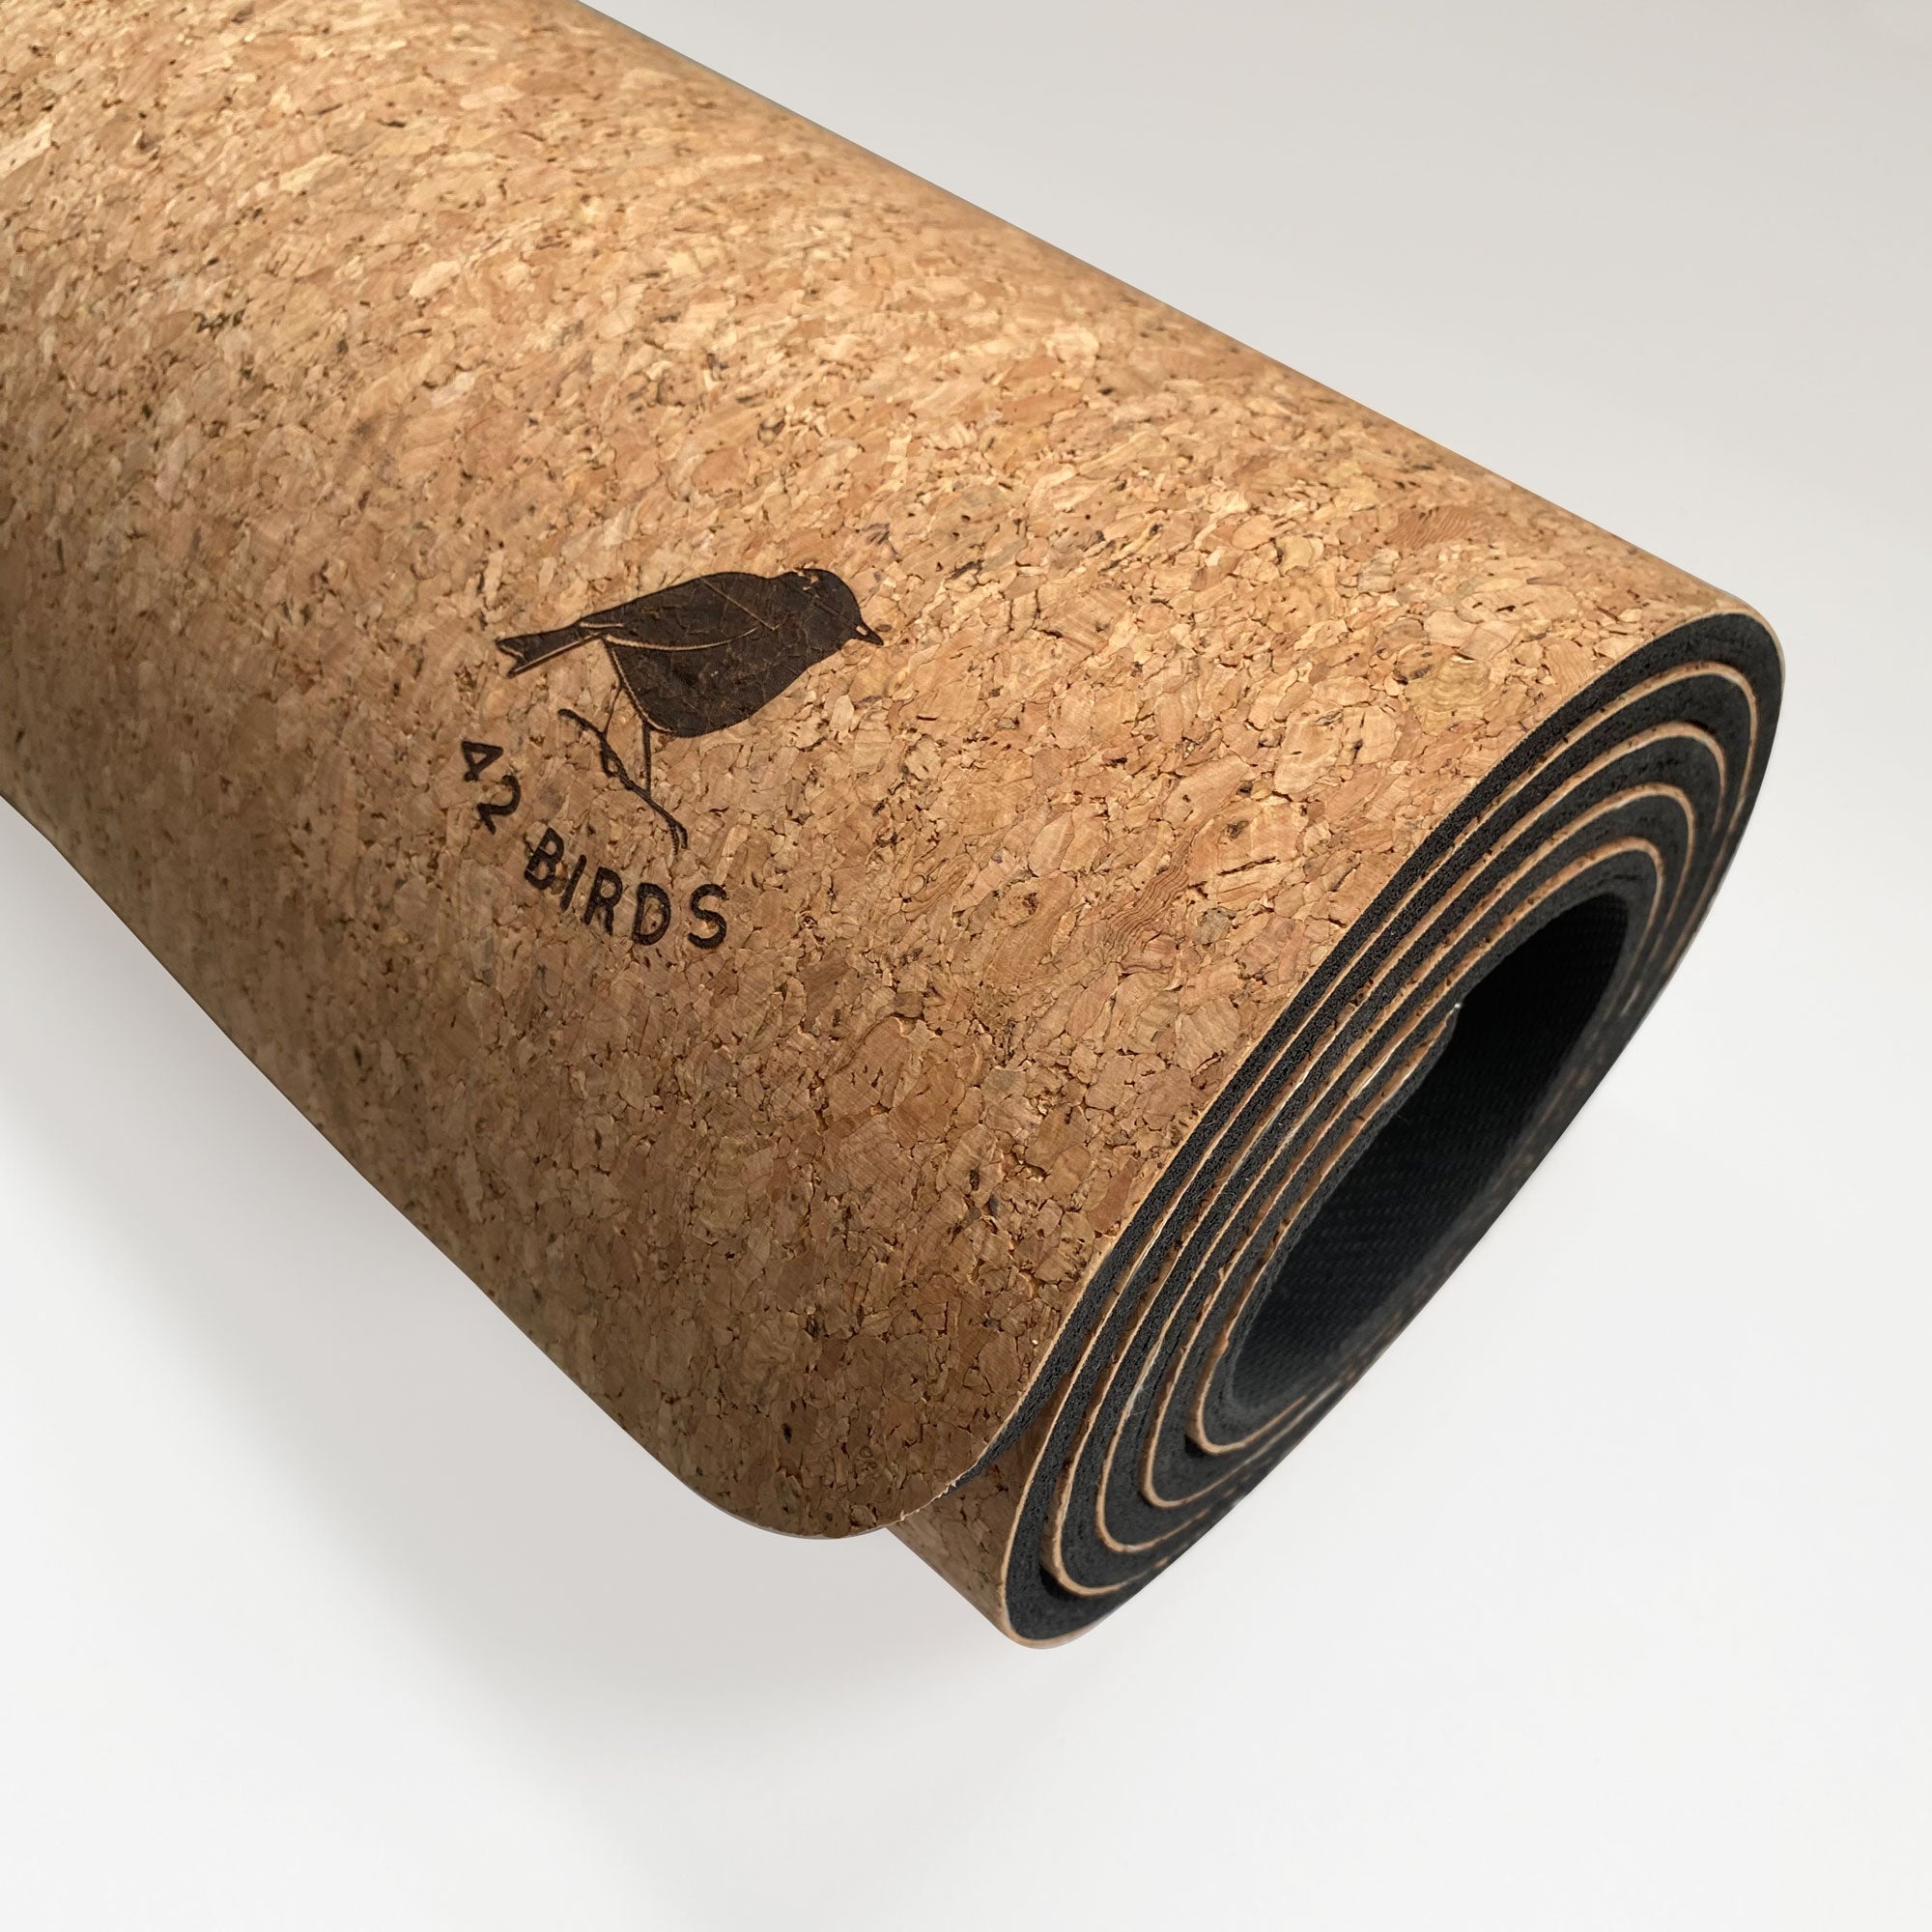 Extra Long Cork Yoga Industrial Mat “The Imperial Eagle” - 42 Birds